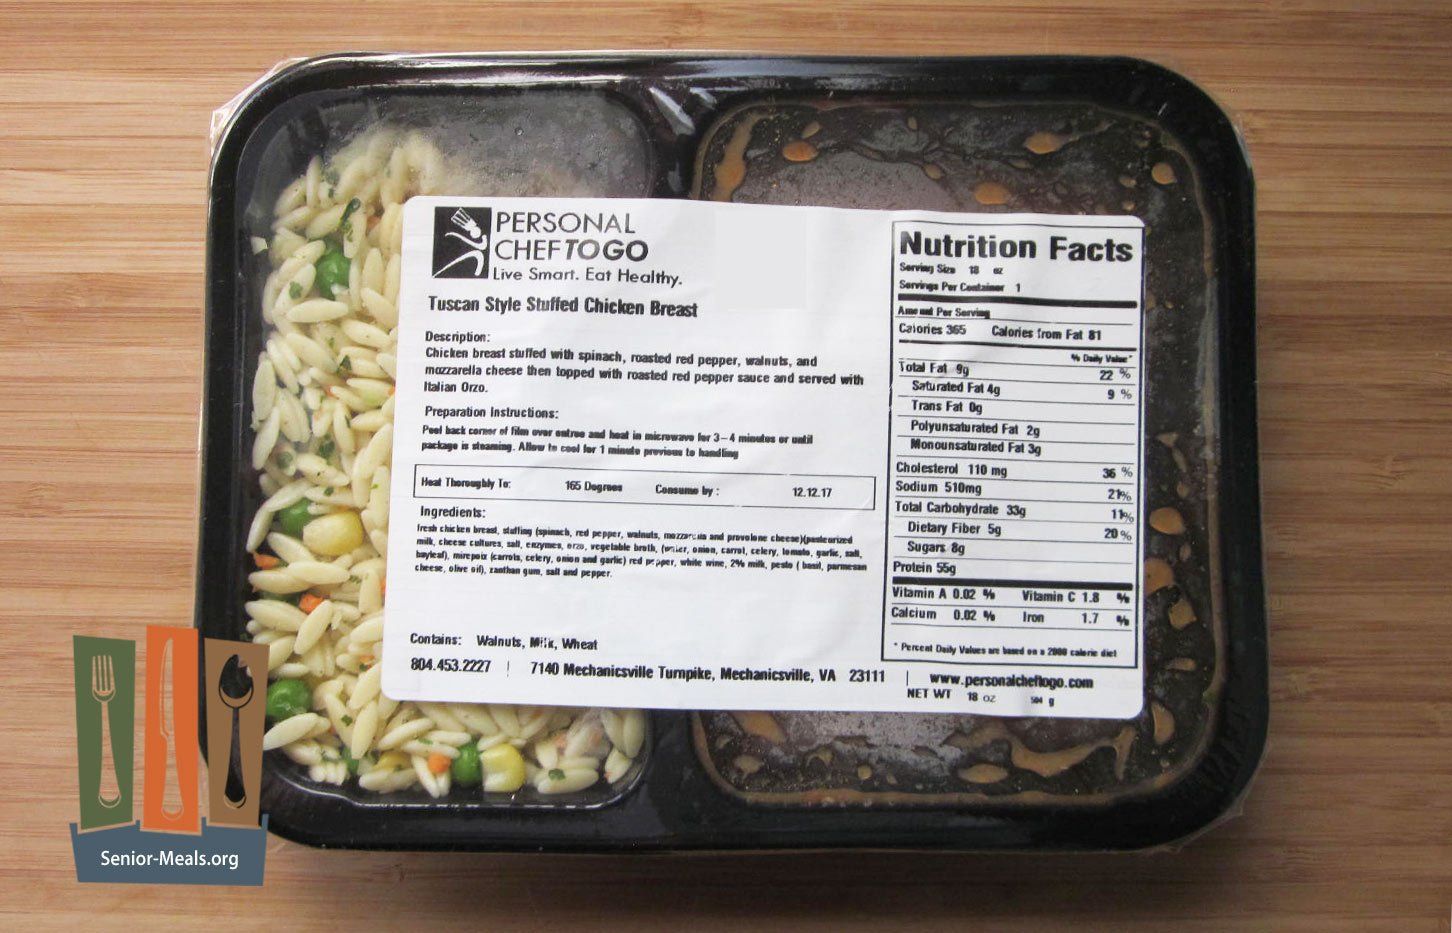 Meals Arrive Fresh, Not Frozen, in Microwave Trays. Our Orders Qualified for Free Shipping.